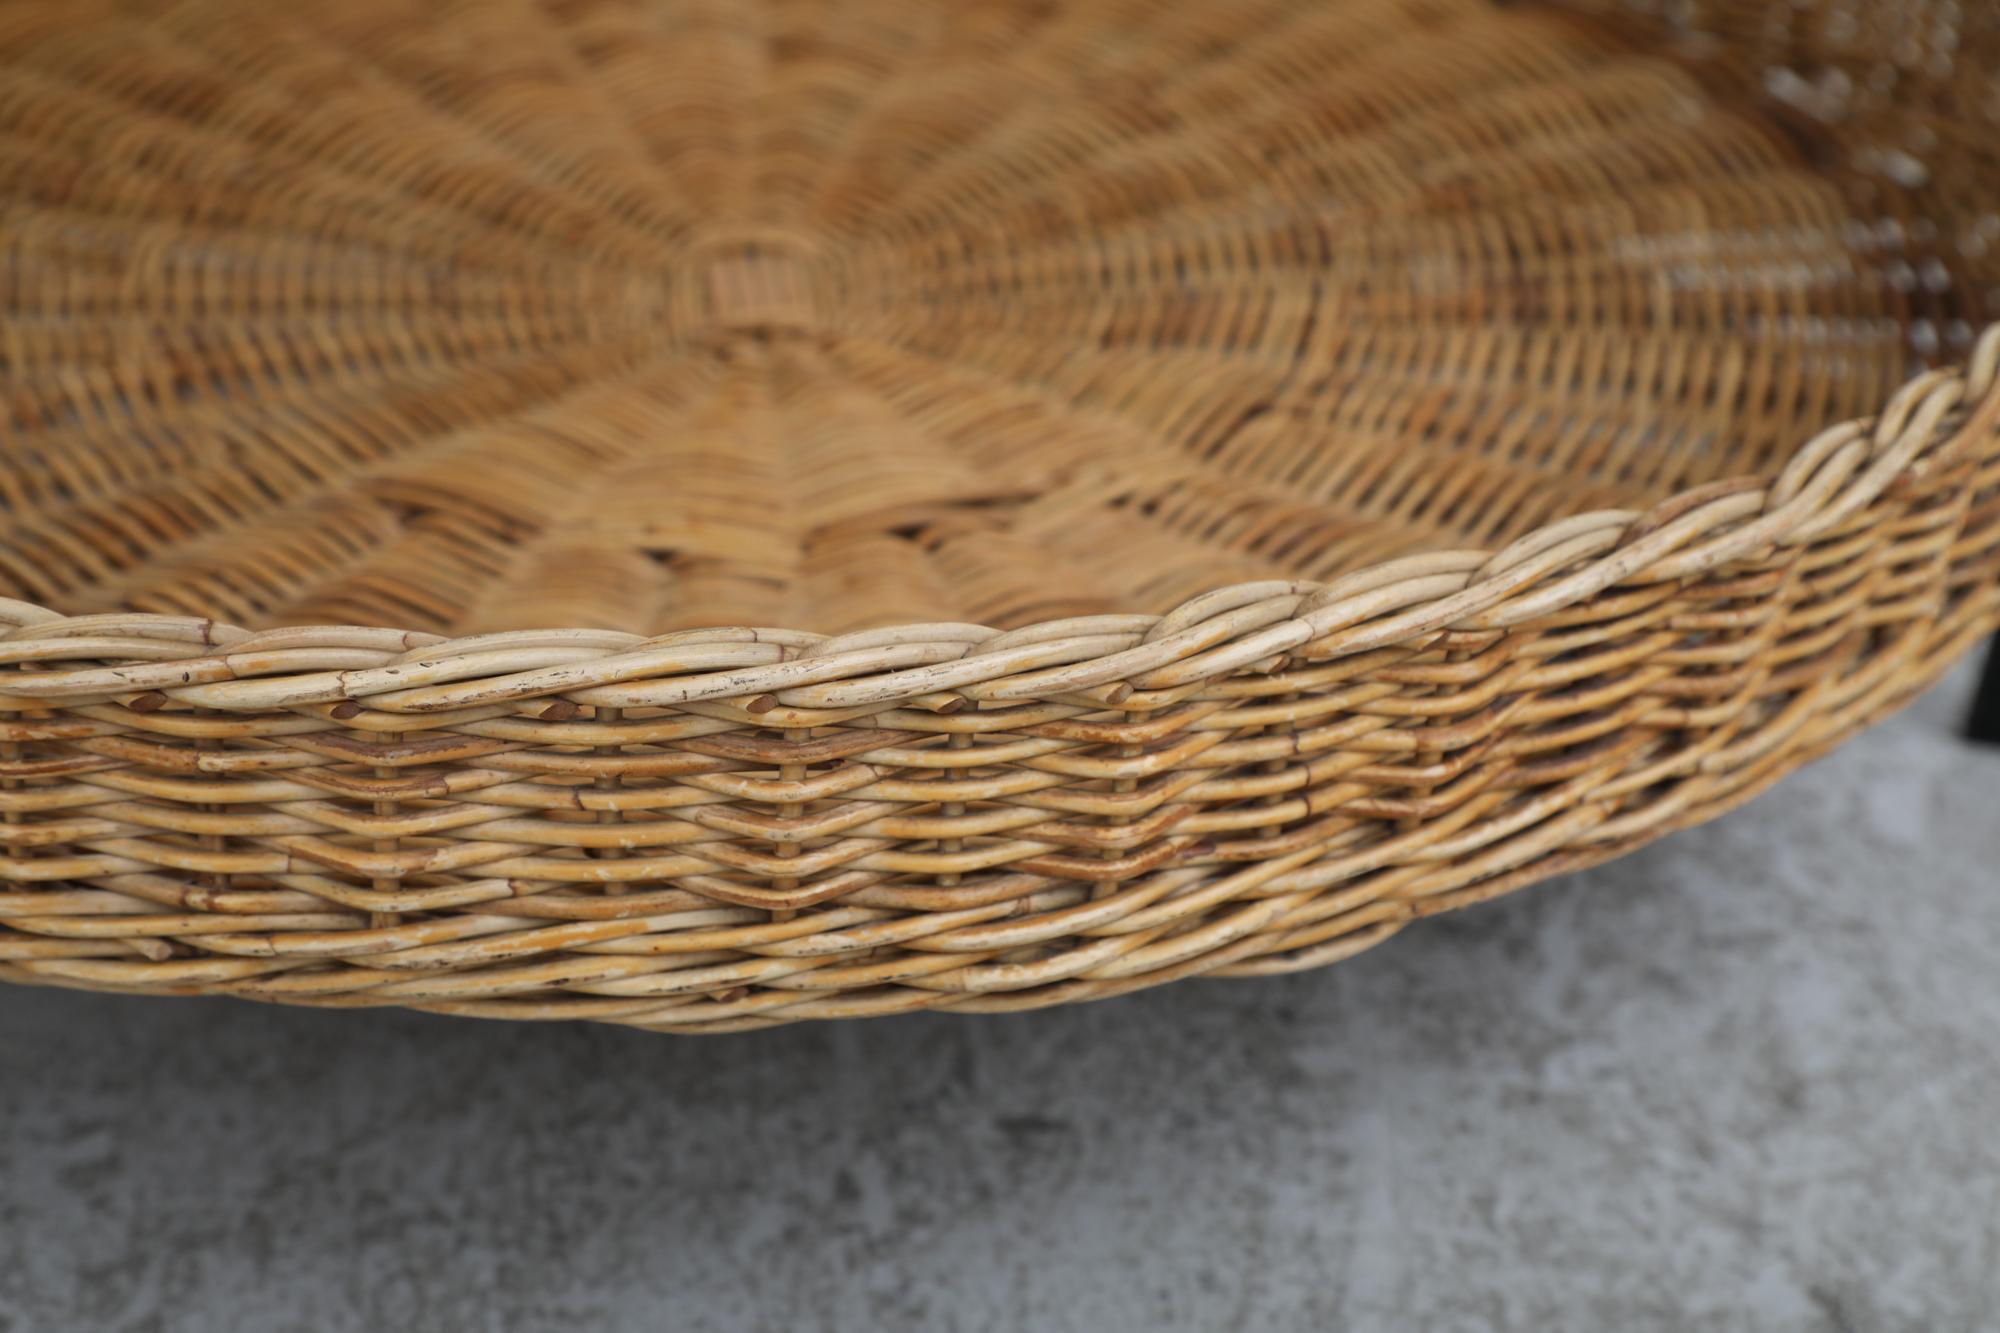 Mid-Century Modernist Coffee Table with Smoked Glass and Rattan Basket For Sale 3